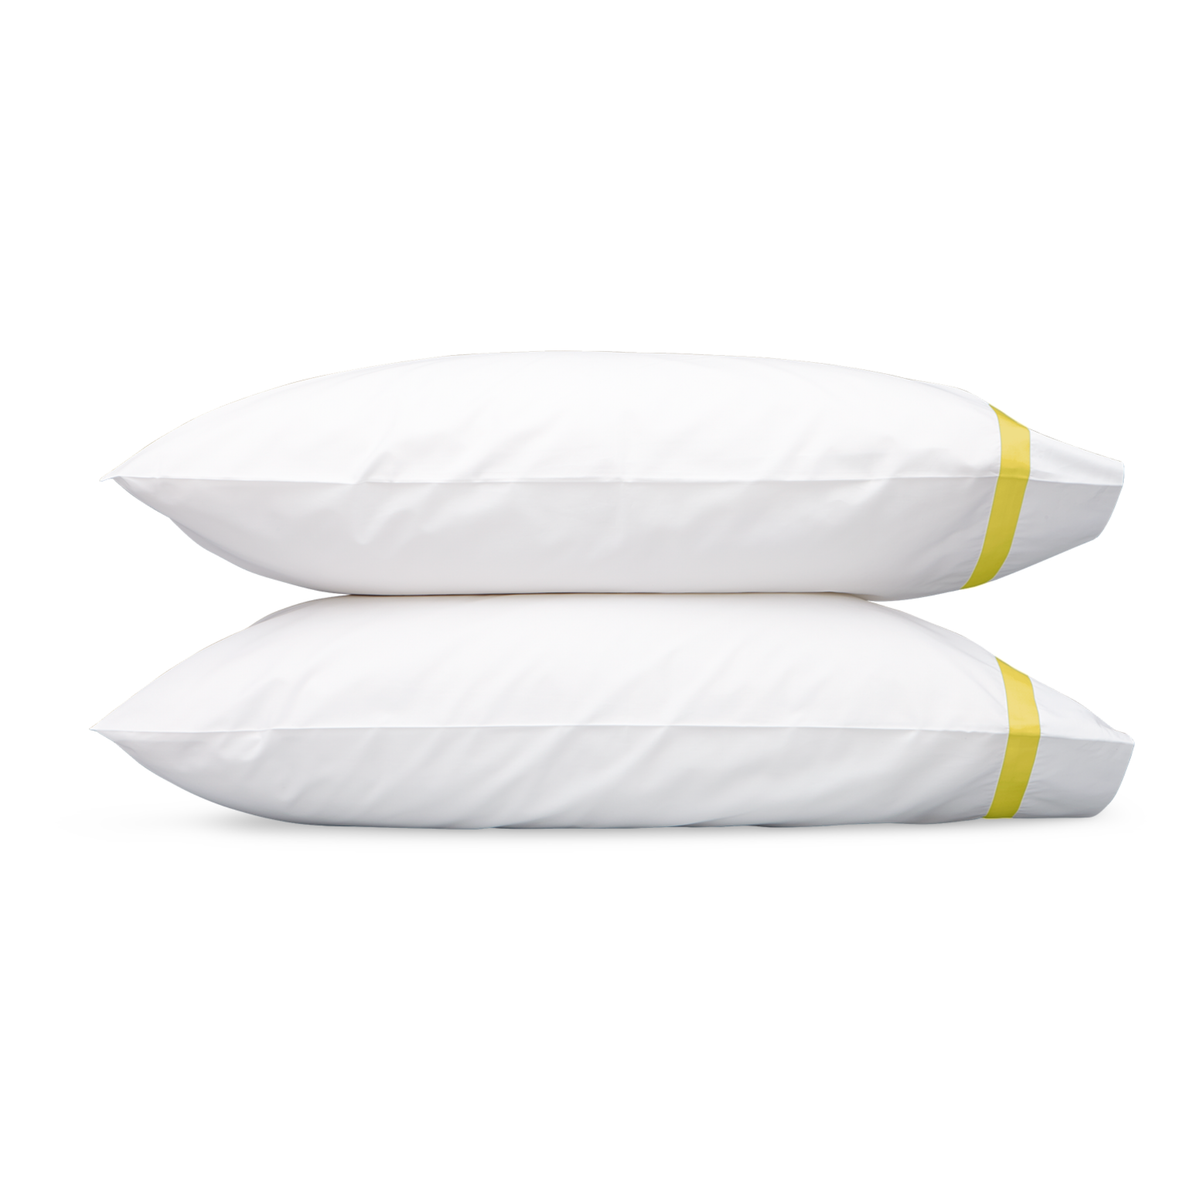 A Pair of Matouk Lowell Bedding Pillowcases in Lemon Color